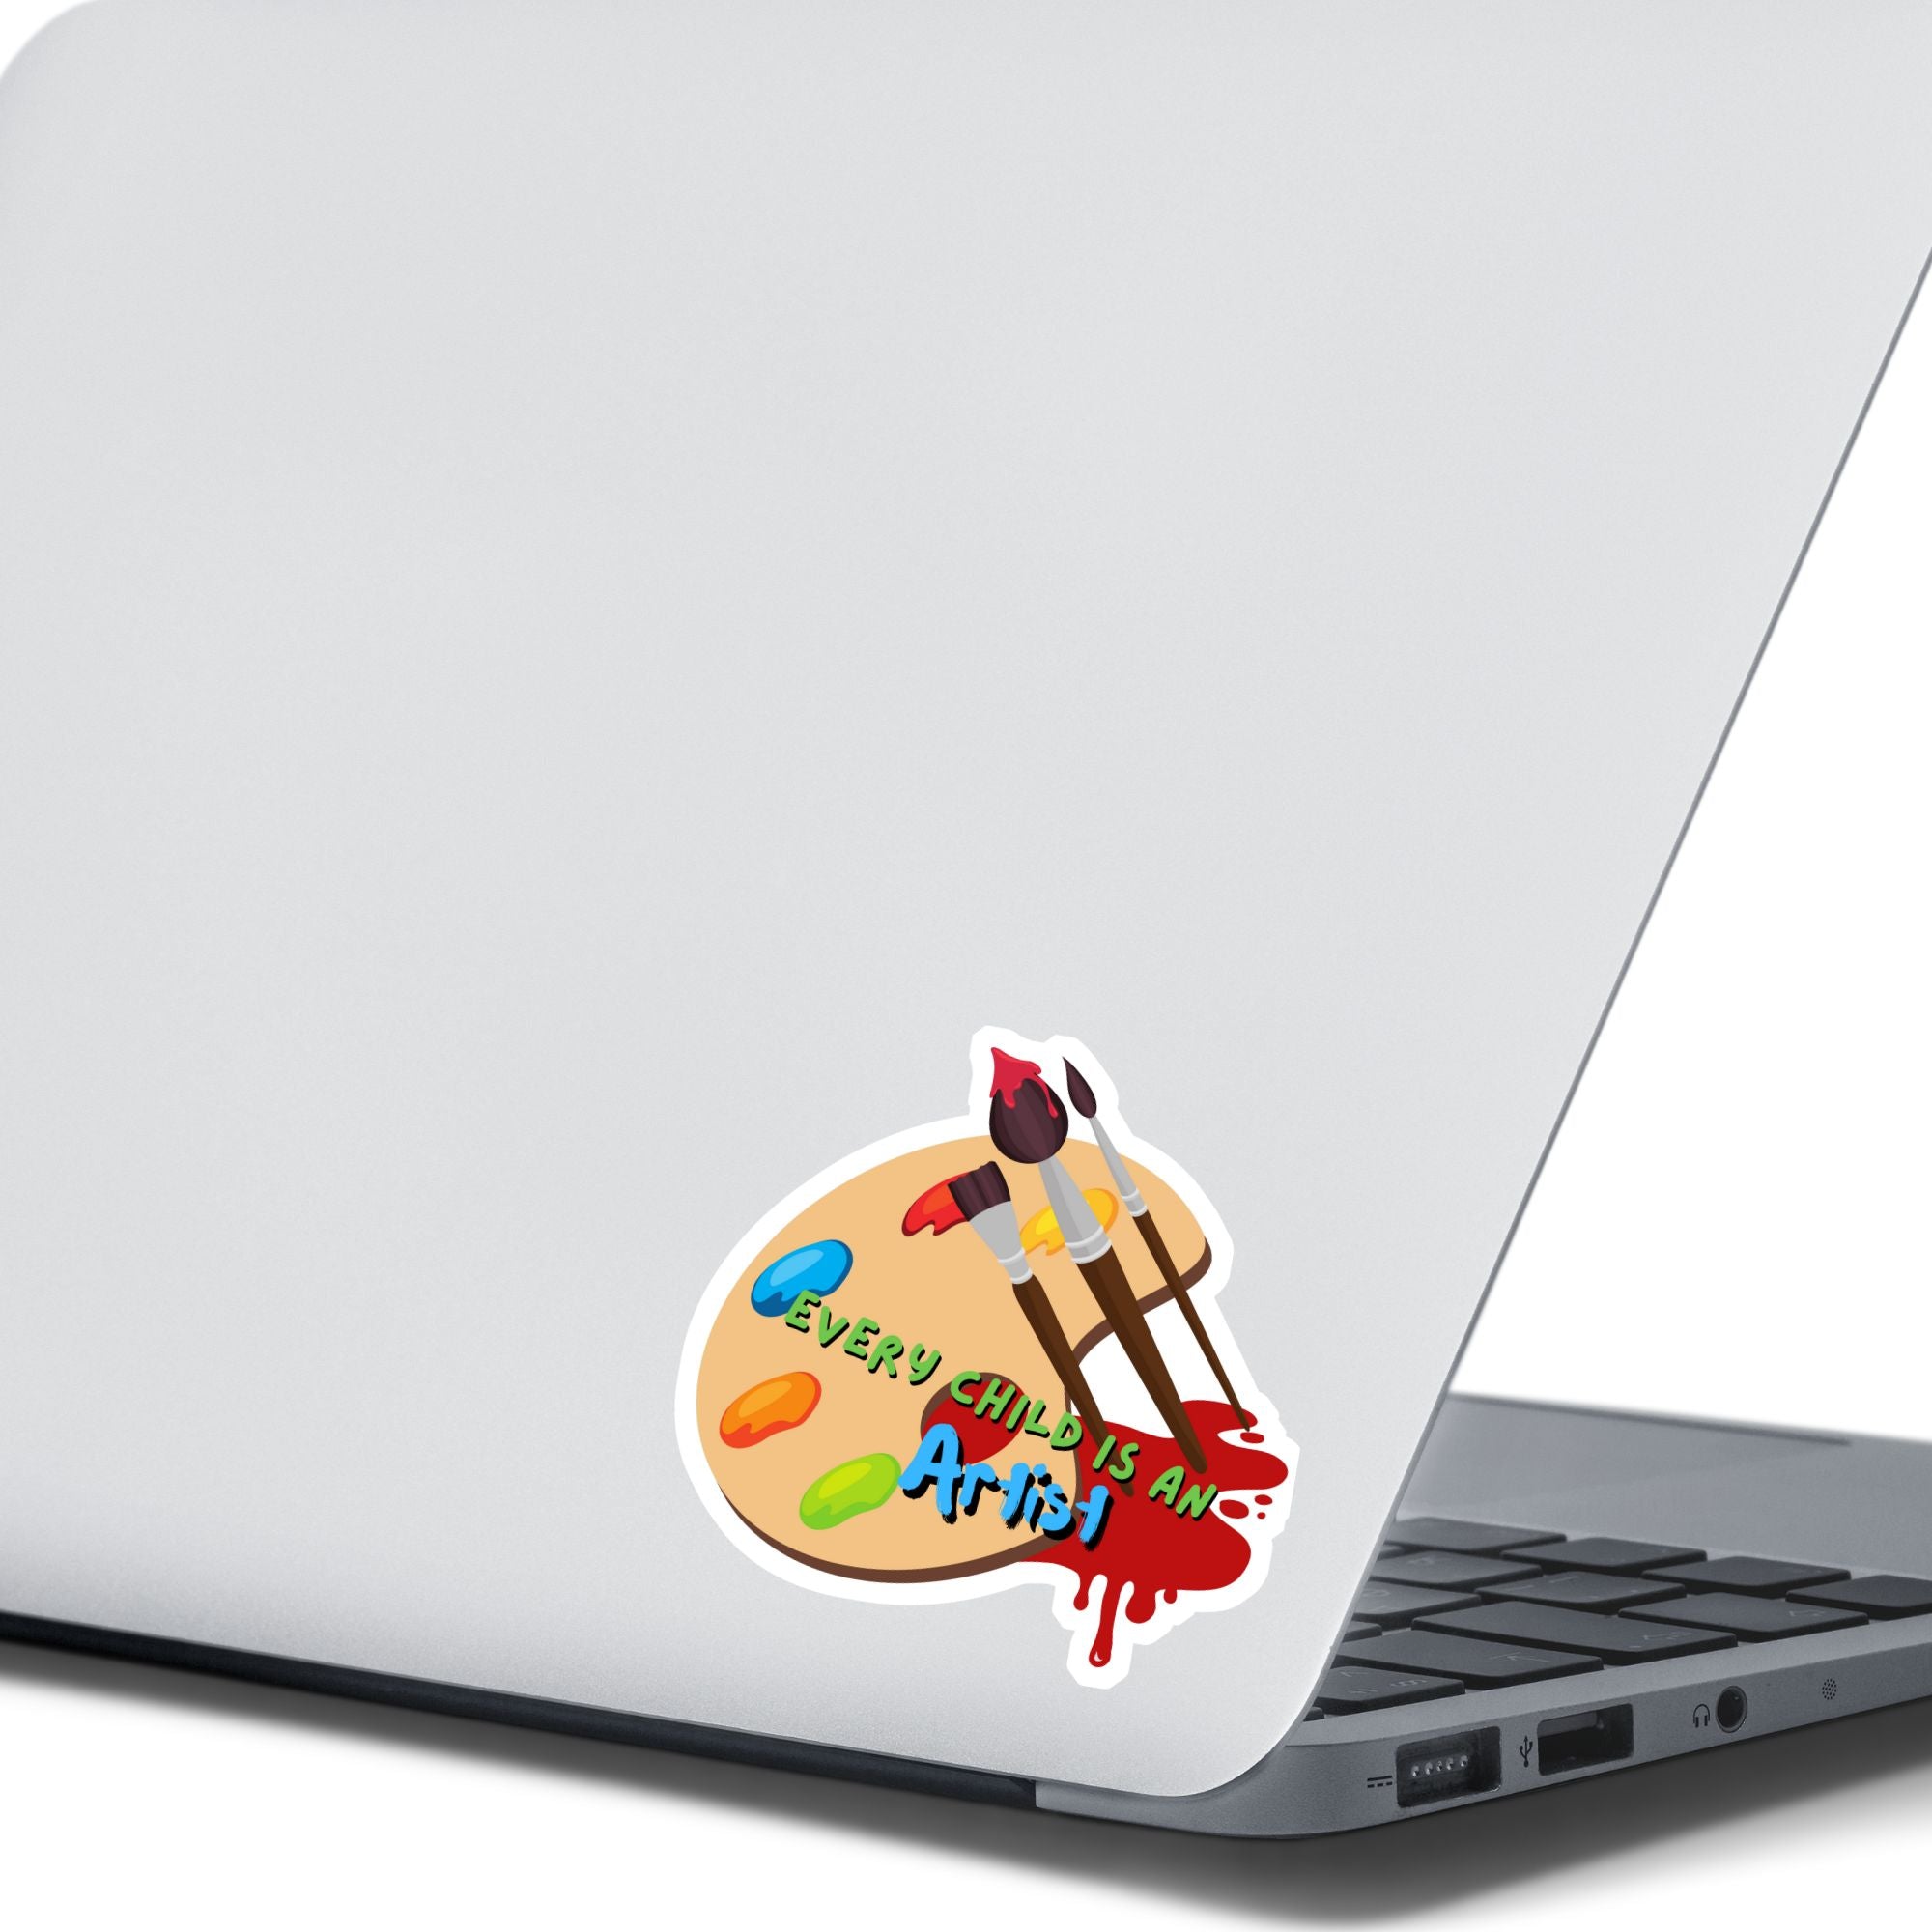 Whether for a child, or an inner child, this individual die-cut sticker is great for all artists! The Every Child is an Artist sticker has a paint palette and brushes to inspire you to create your next masterpiece. This image shows the Every Child is an Artist die-cut sticker on the back of an open laptop.